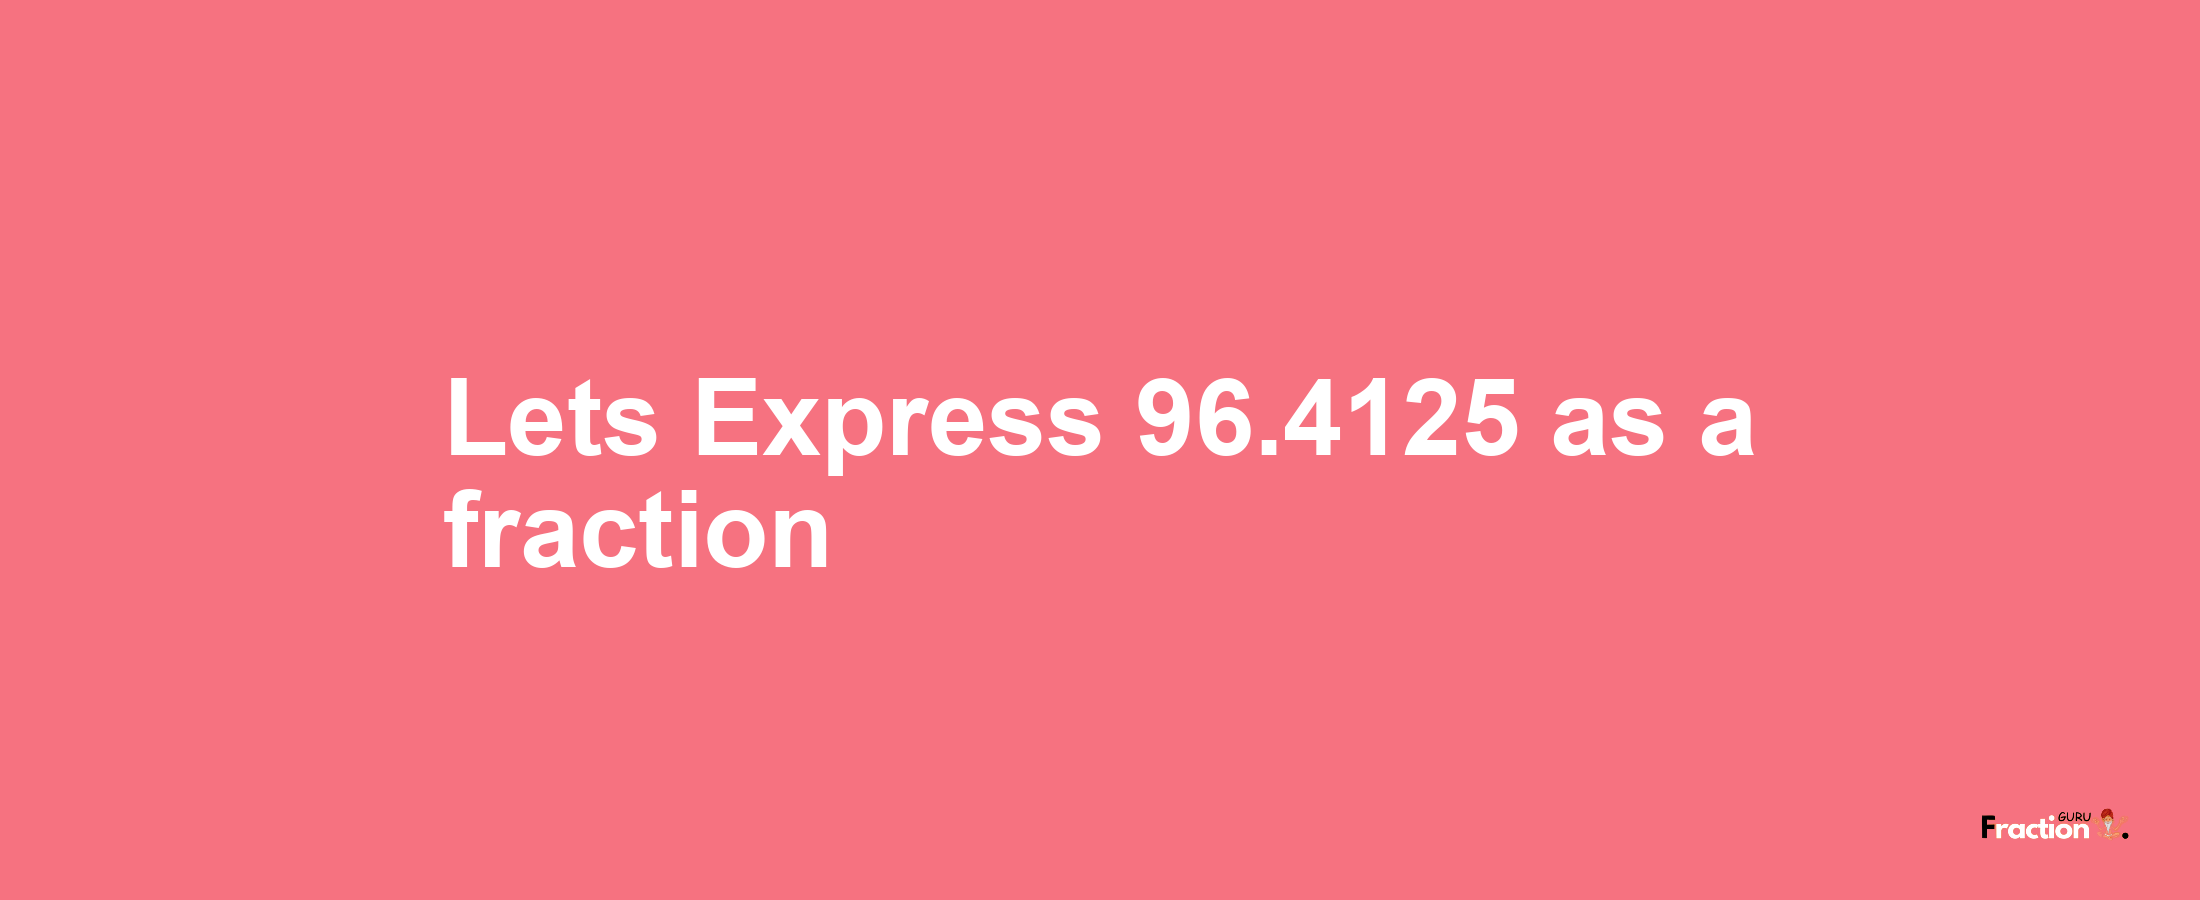 Lets Express 96.4125 as afraction